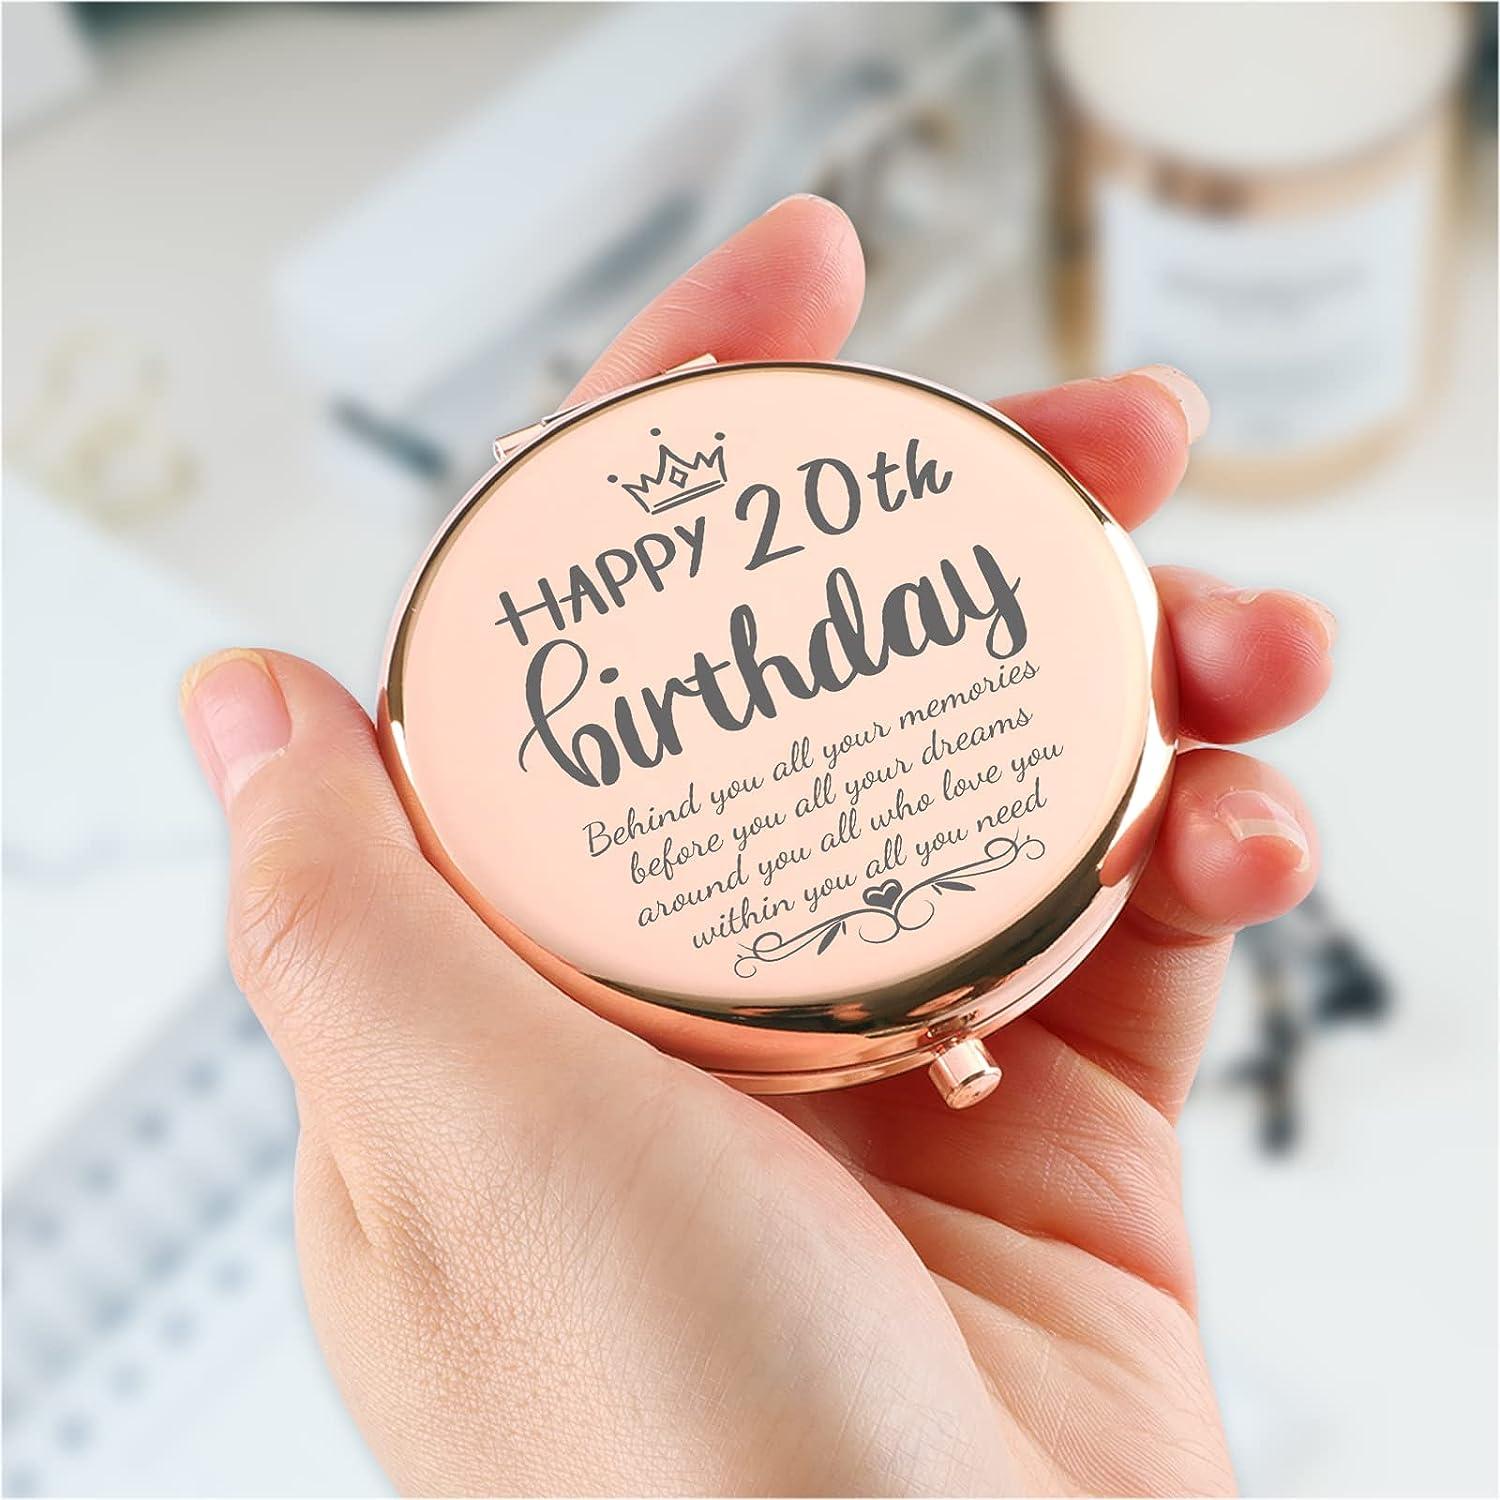 Mwphuy 20th Birthday Gifts for Girls Friend 20 Year Old Birthday Gifts Inspirational Gifts Makeup Mirror for Daughter Niece Happy 20th